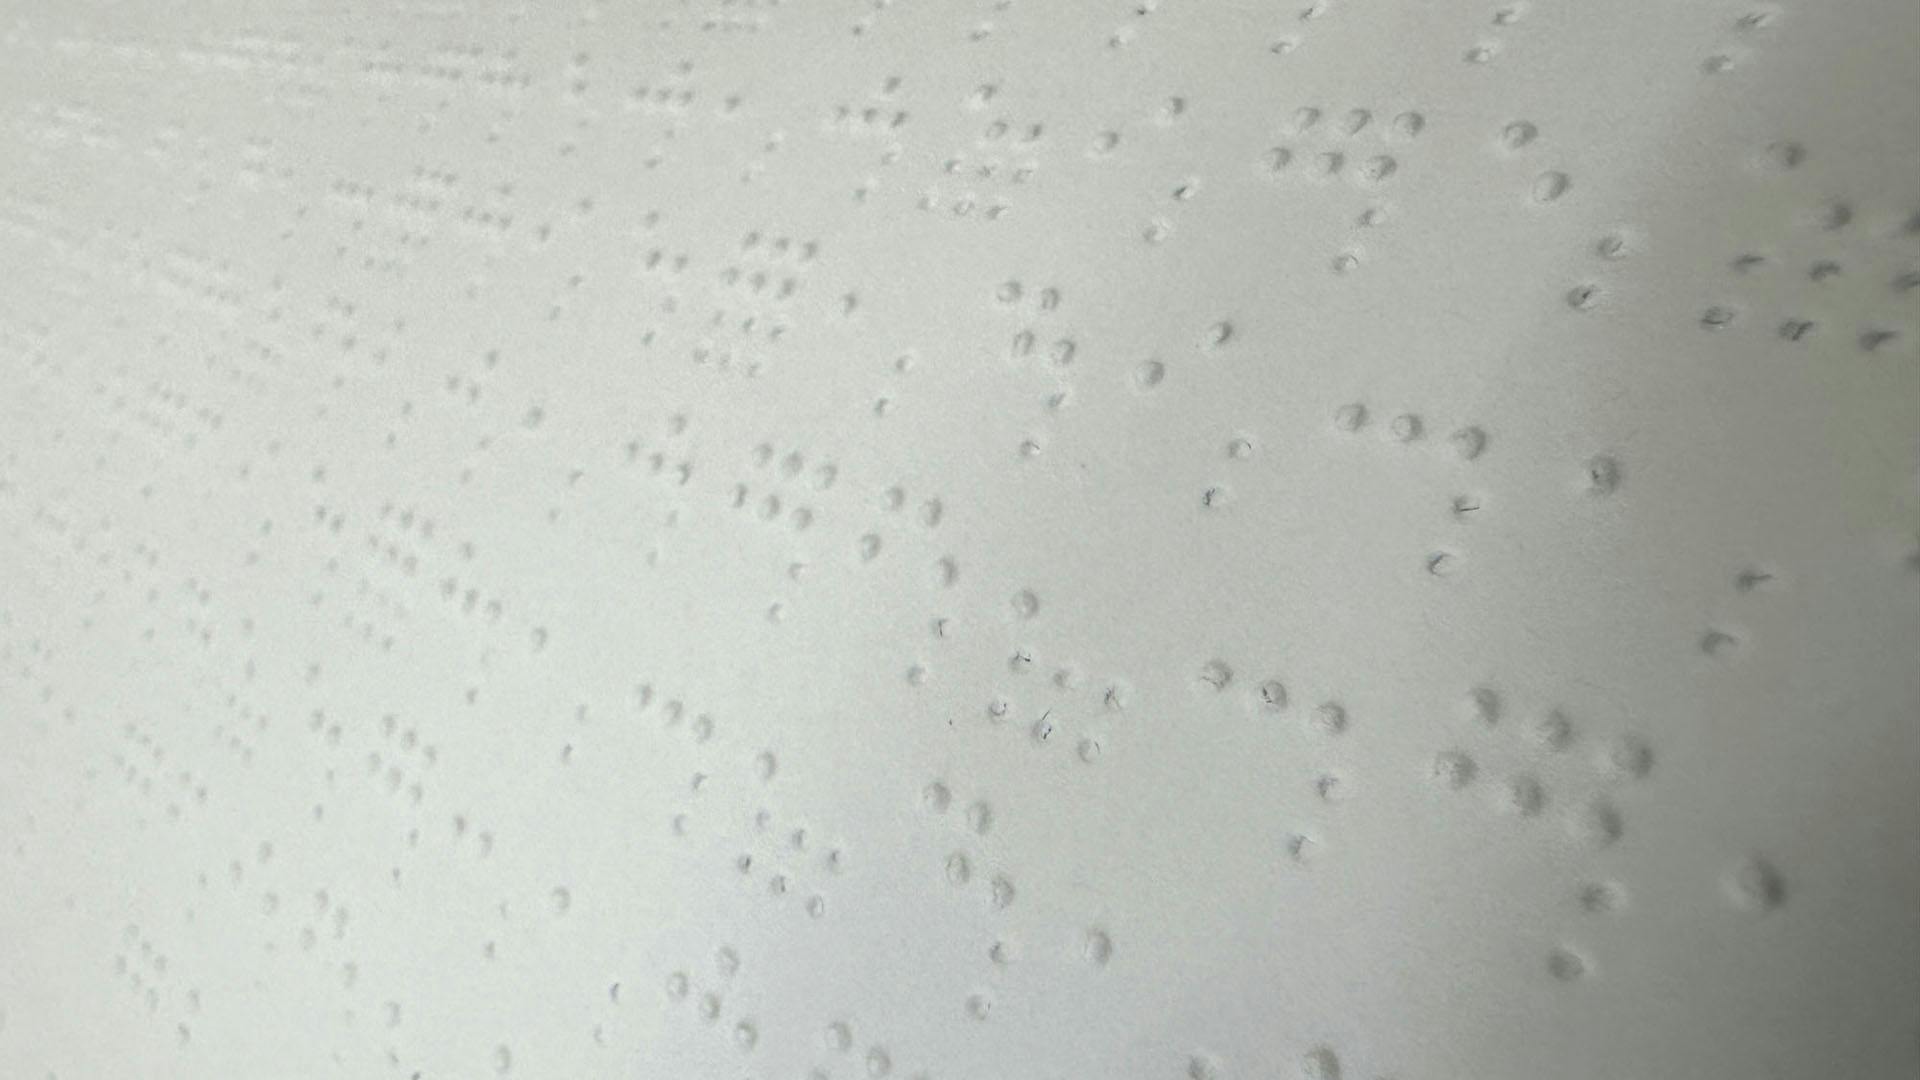 Detail of a book printed in Braille